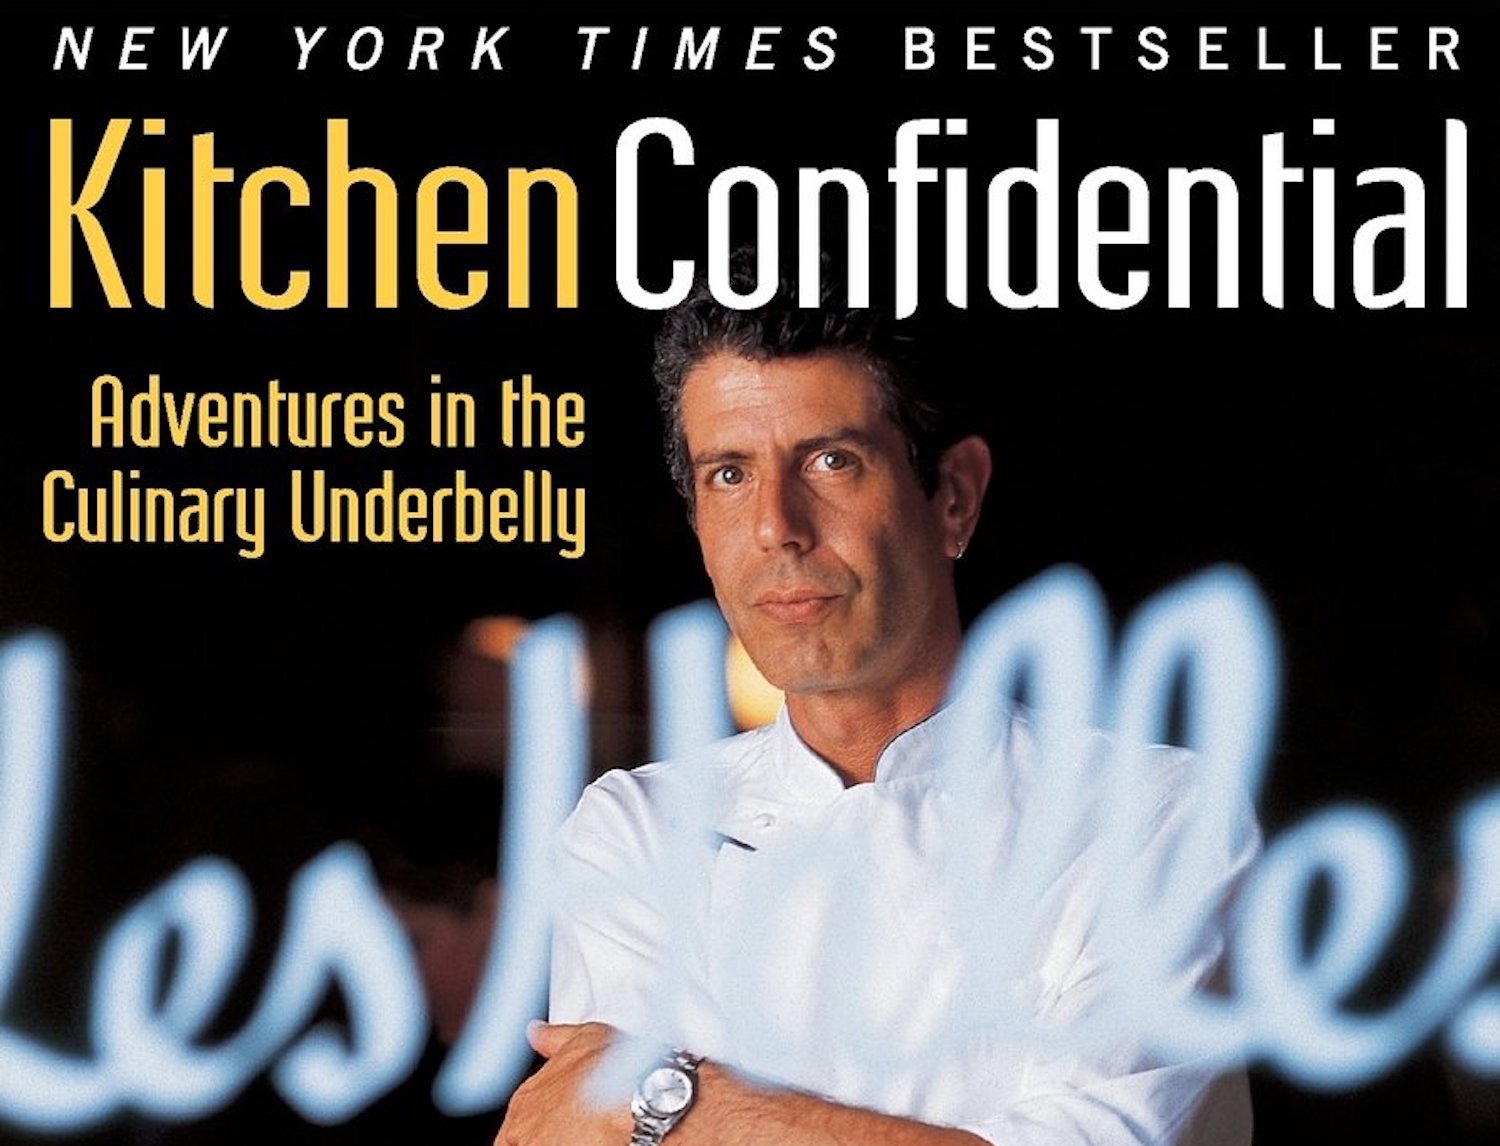 On the book cover for Kitchen Confidential, Anthony Bourdain, with salt and pepper hair, stands dressed in a buttoned-up chef’s coat a in front of restaurant windows painted with the words “les halles.” The book’s title appears above his head in bold yellow block letters.